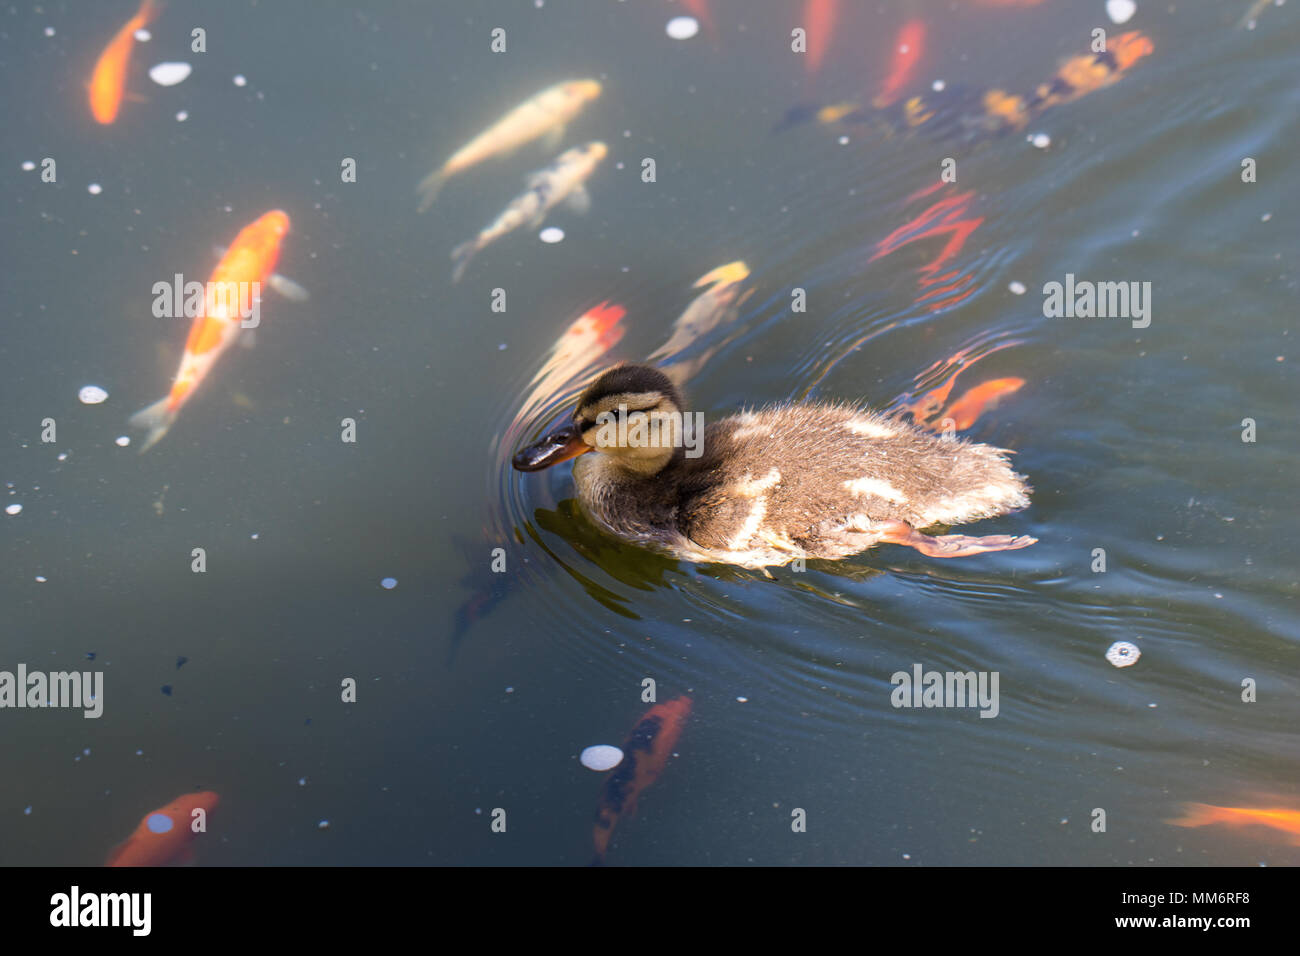 Cute duckling swimming in a koi pond Stock Photo